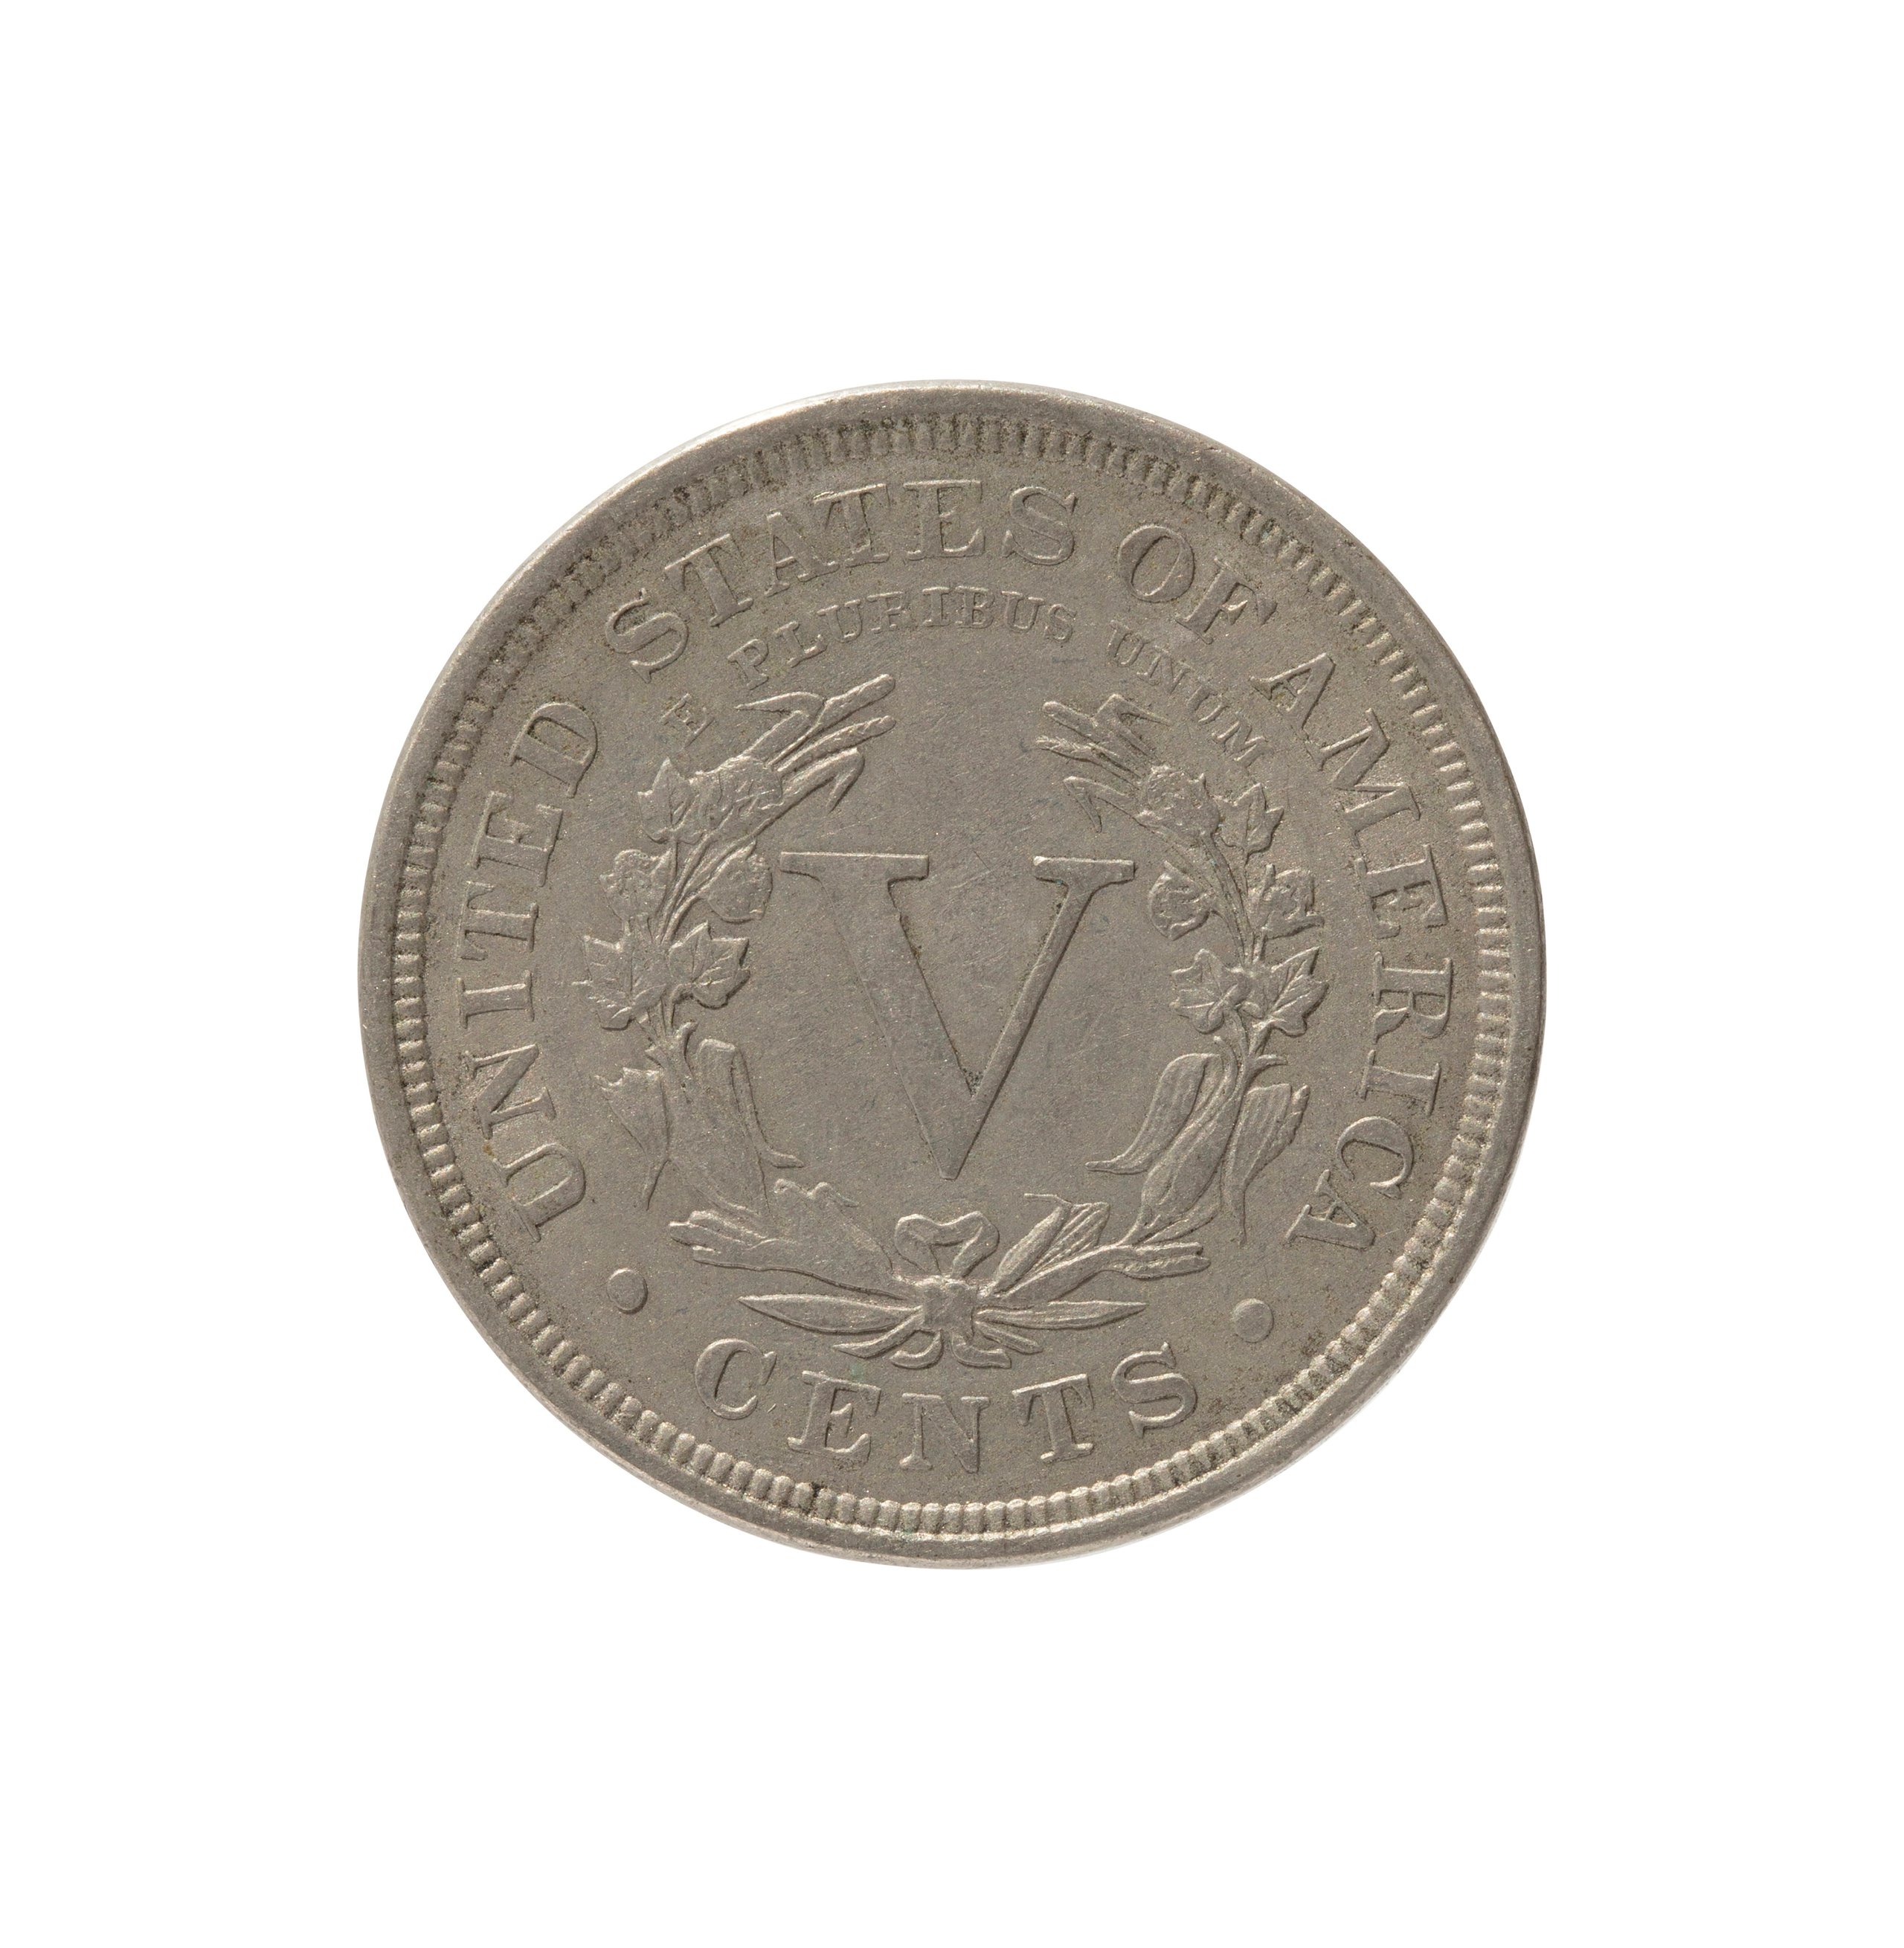 American Five Cents coin